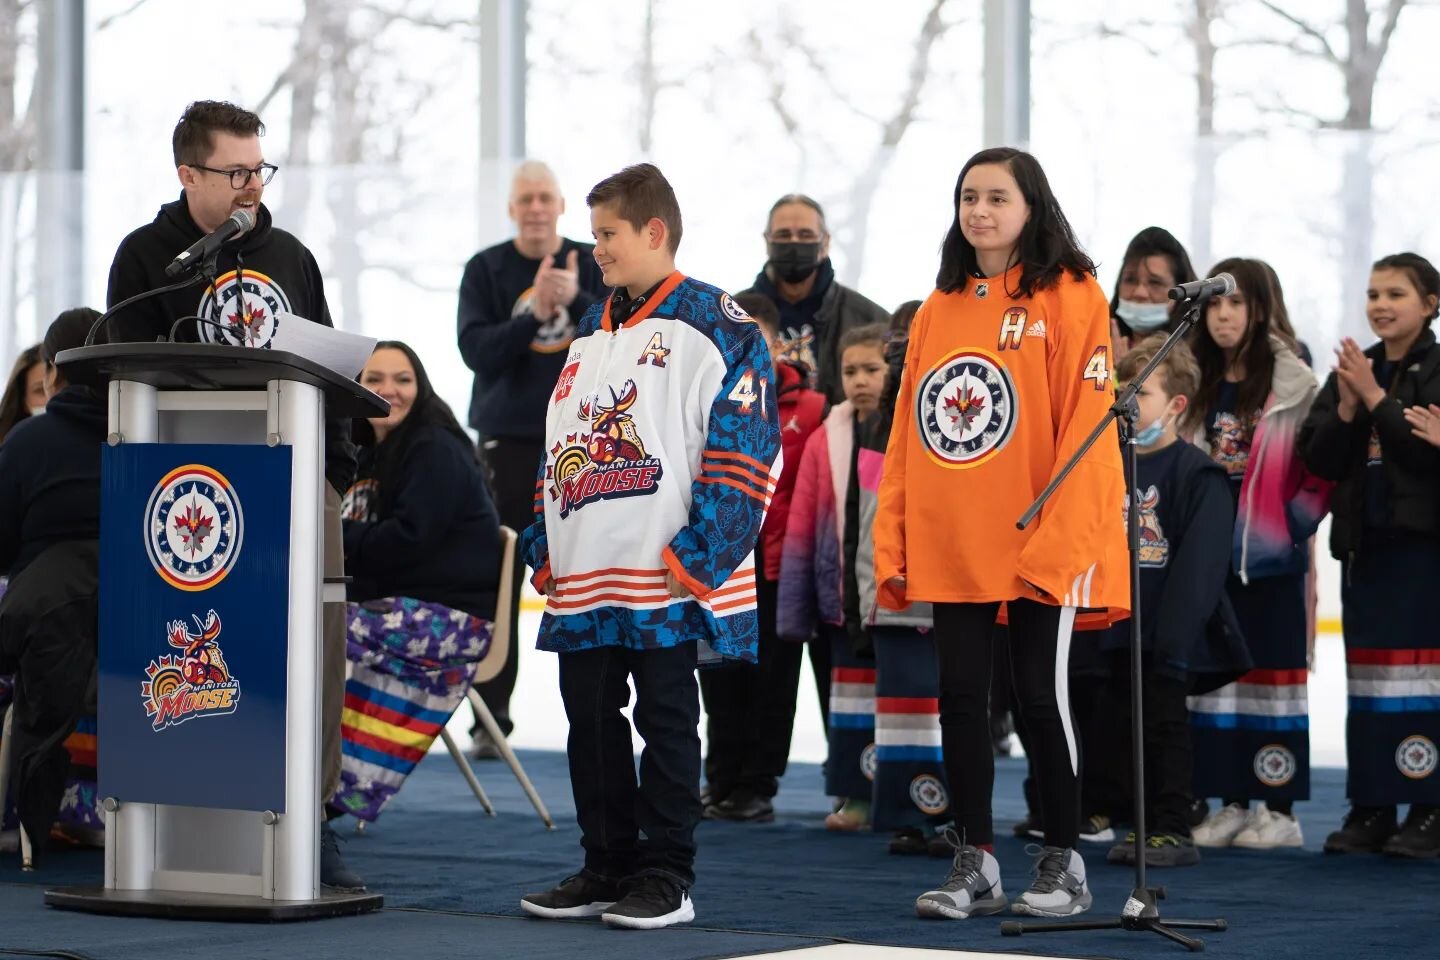 Miigwech @NHLJets &amp; @ManitobaMoose - What a great kickoff unveiling new Indigenous themed jerseys for the 4th year of #WASACNight #FollowYourDreamsDay games this weekend 🧡 We are grateful for our partnership that creates opportunities for youth 